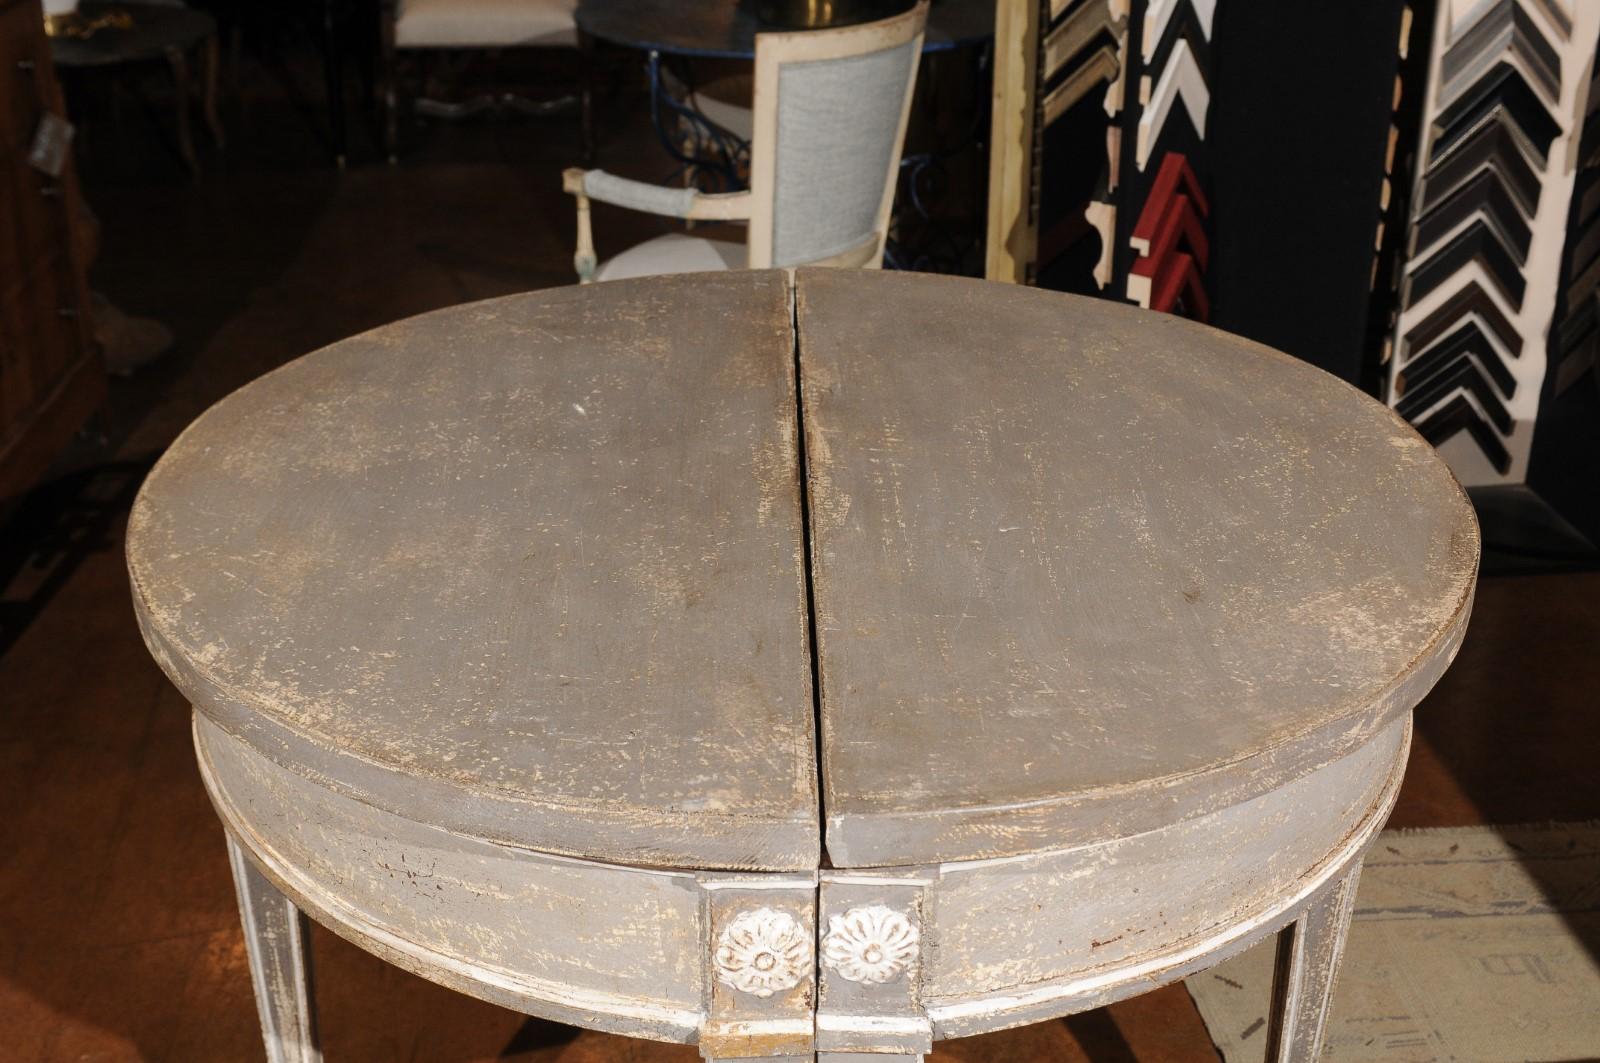 A pair of French neoclassical style painted wood demilune tables from the 19th century, with carved rosettes and tapered legs. Born in France during the politically dynamic 19th century, each of this pair of Neoclassical style demilunes features a